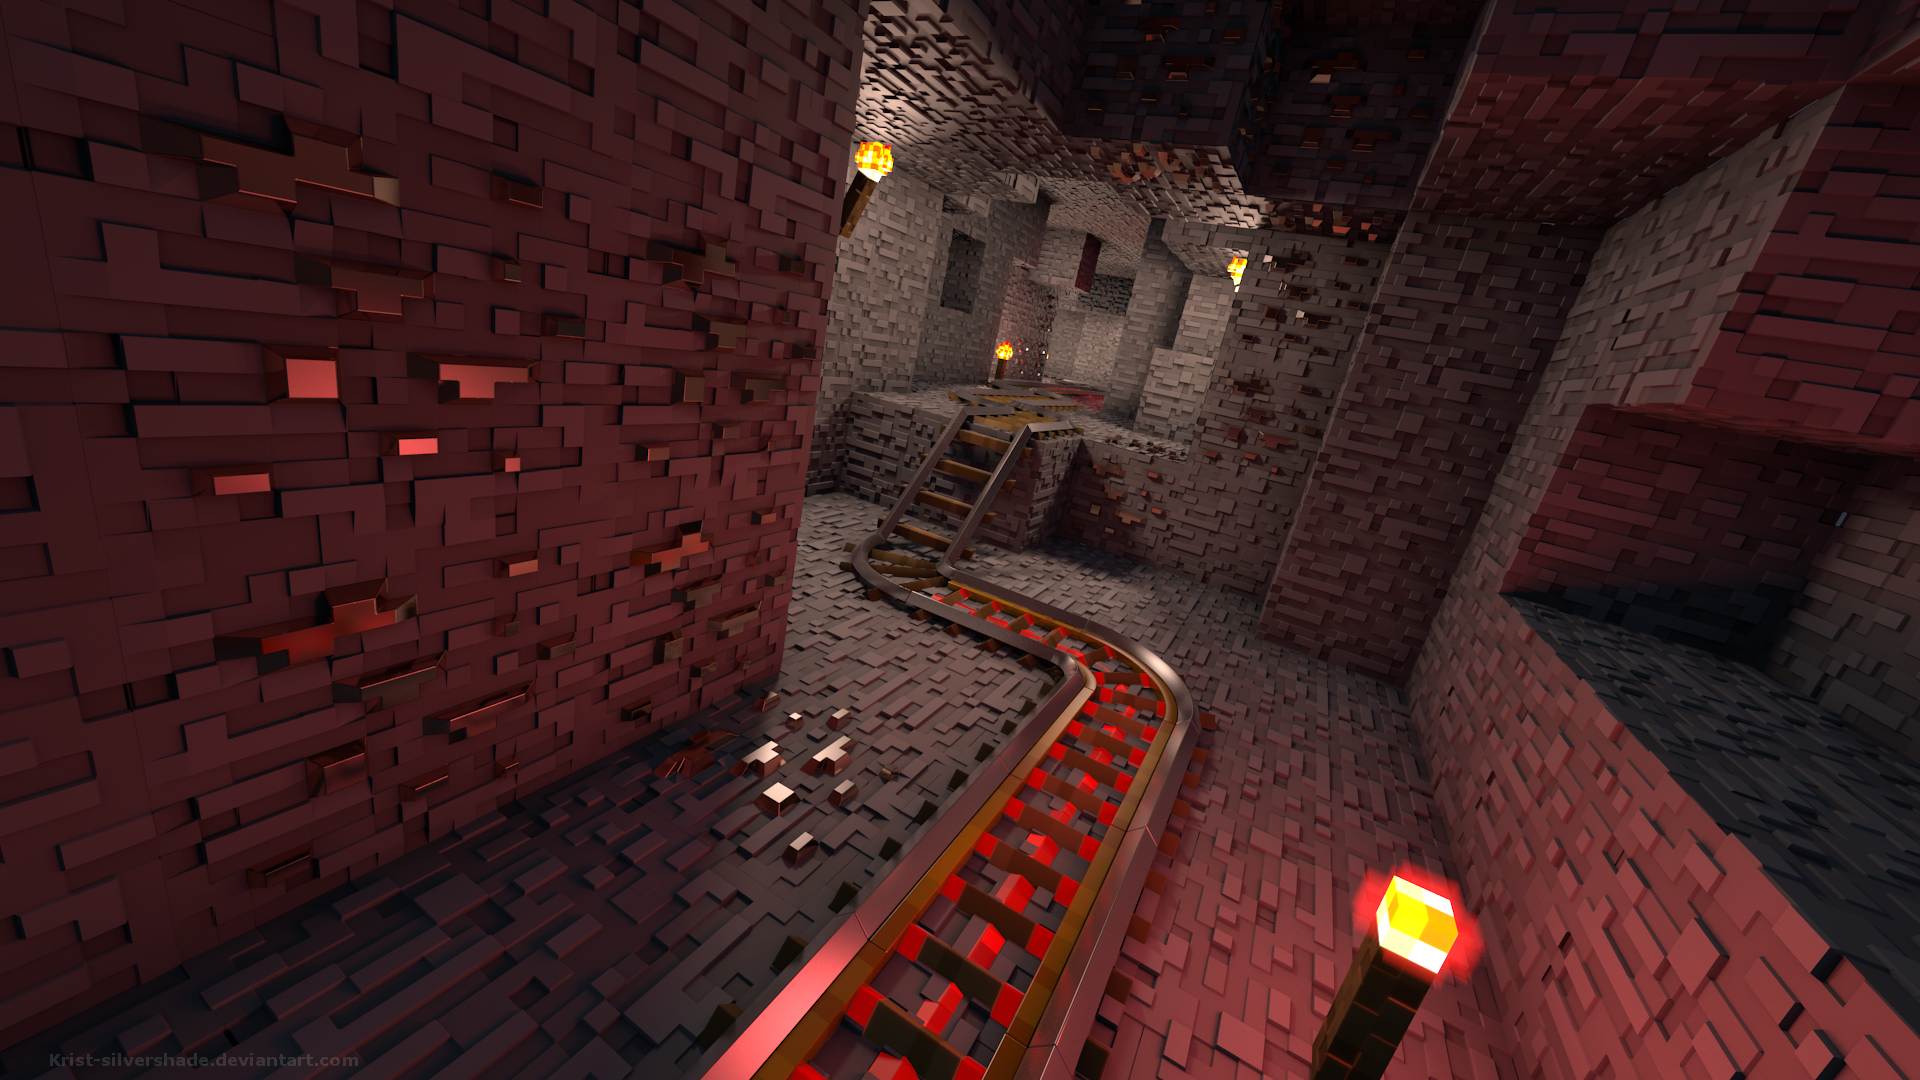 General 1920x1080 render video games Minecraft shaders PC gaming screen shot torches cave DeviantArt